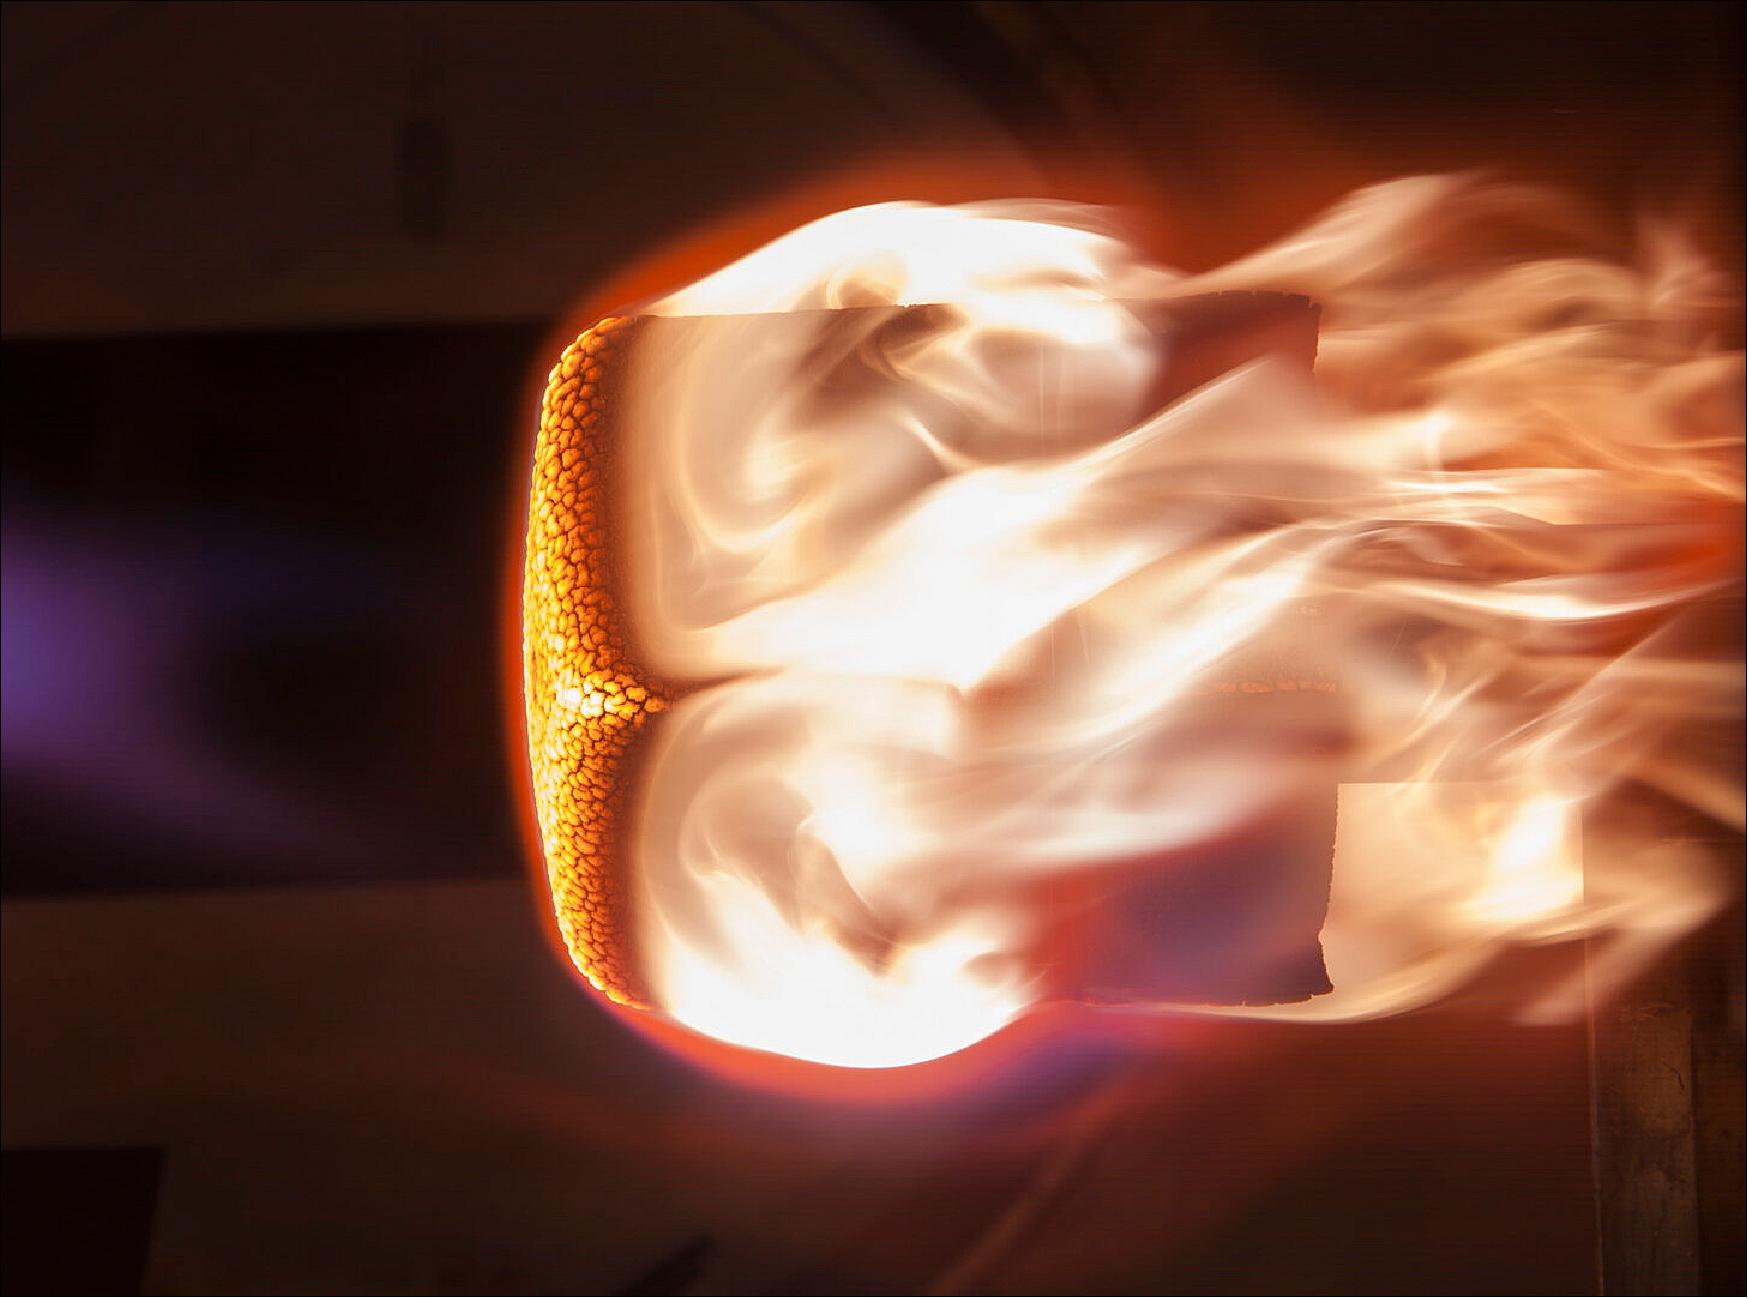 Figure 4: The cork heat shield of ESA's Qarman CubeSat burning away in simulated atmospheric reentry conditions, during ground testing (image credit: VKI)